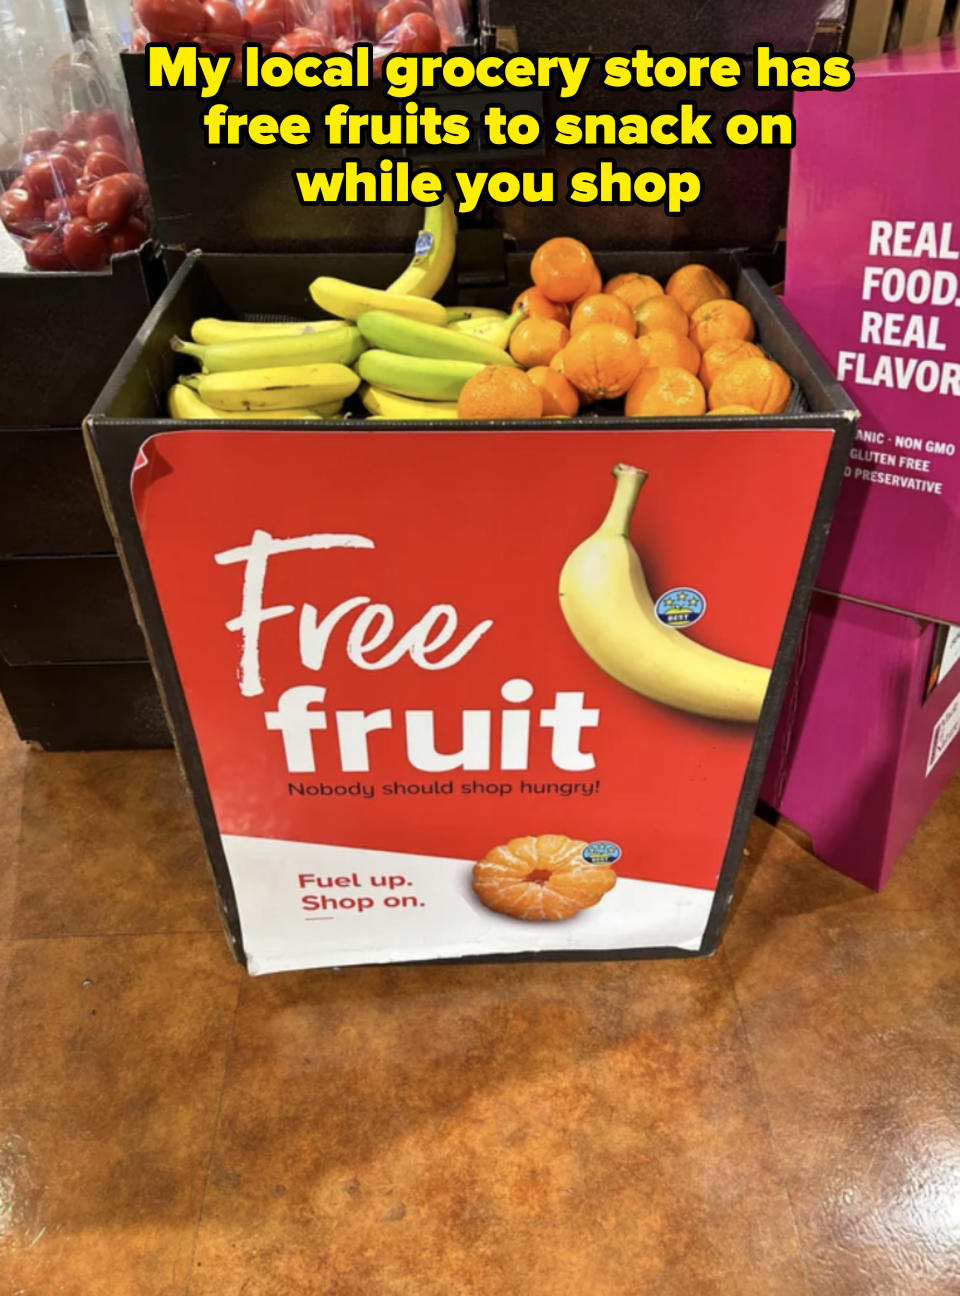 Sign at a store offering 'Free fruit' with the text 'Nobody should shop hungry! Fuel up. Shop on.' Bananas and oranges are pictured